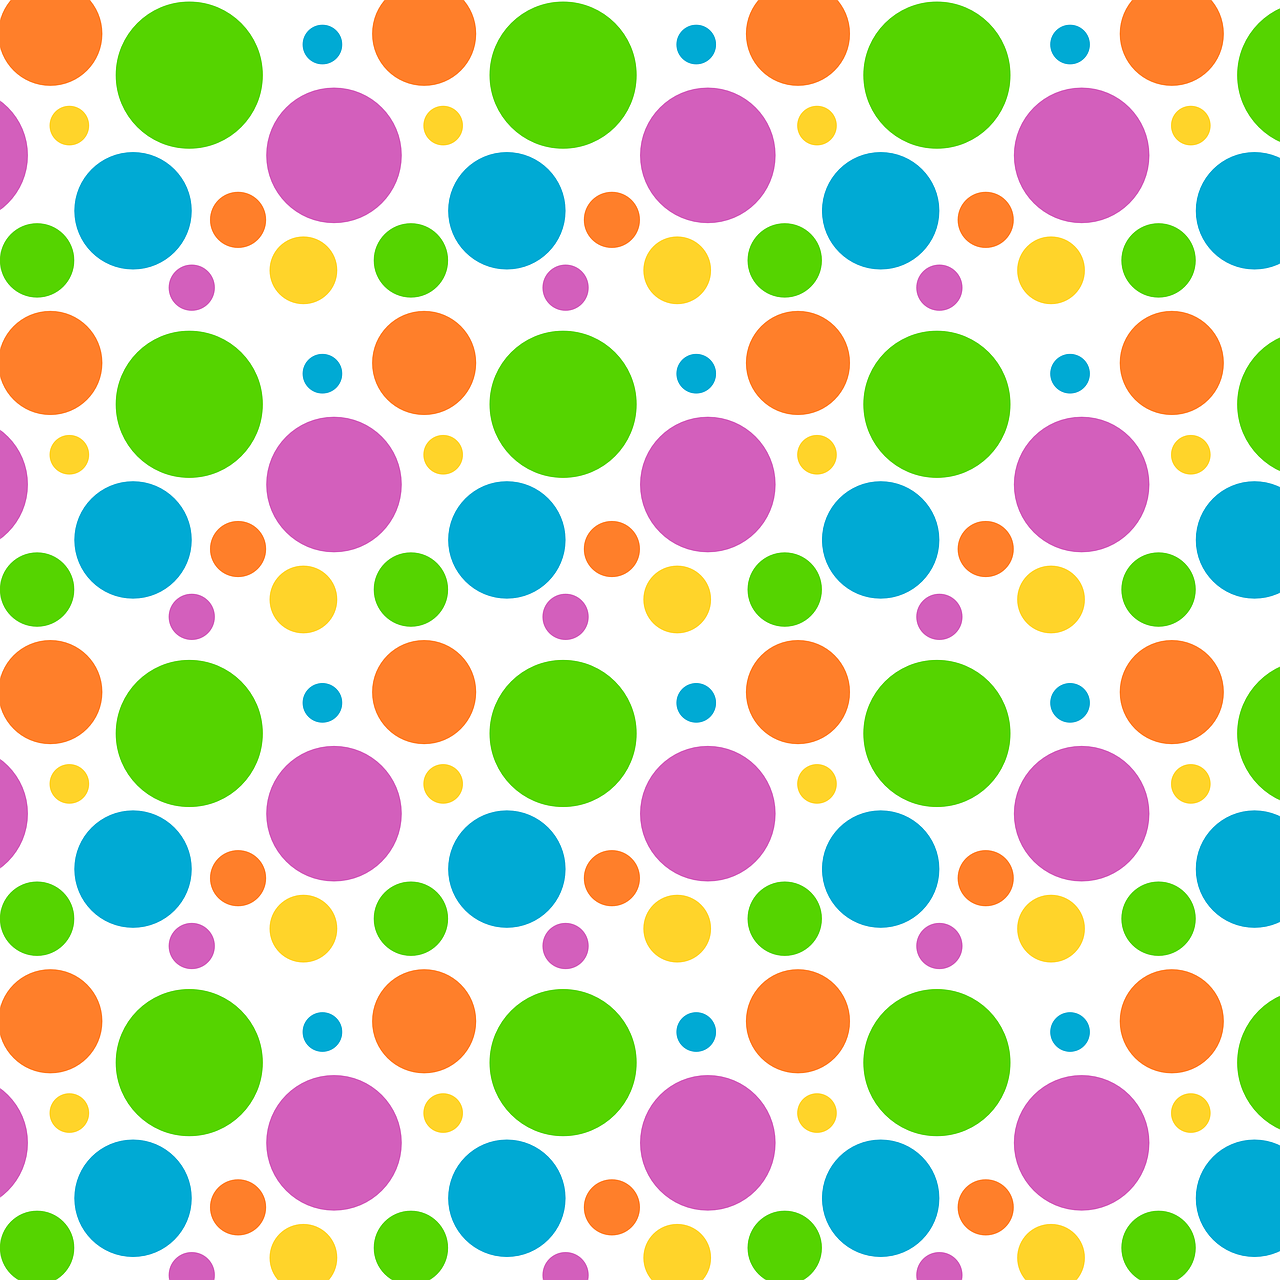 Blue And Green Polka Dot Backgrounds